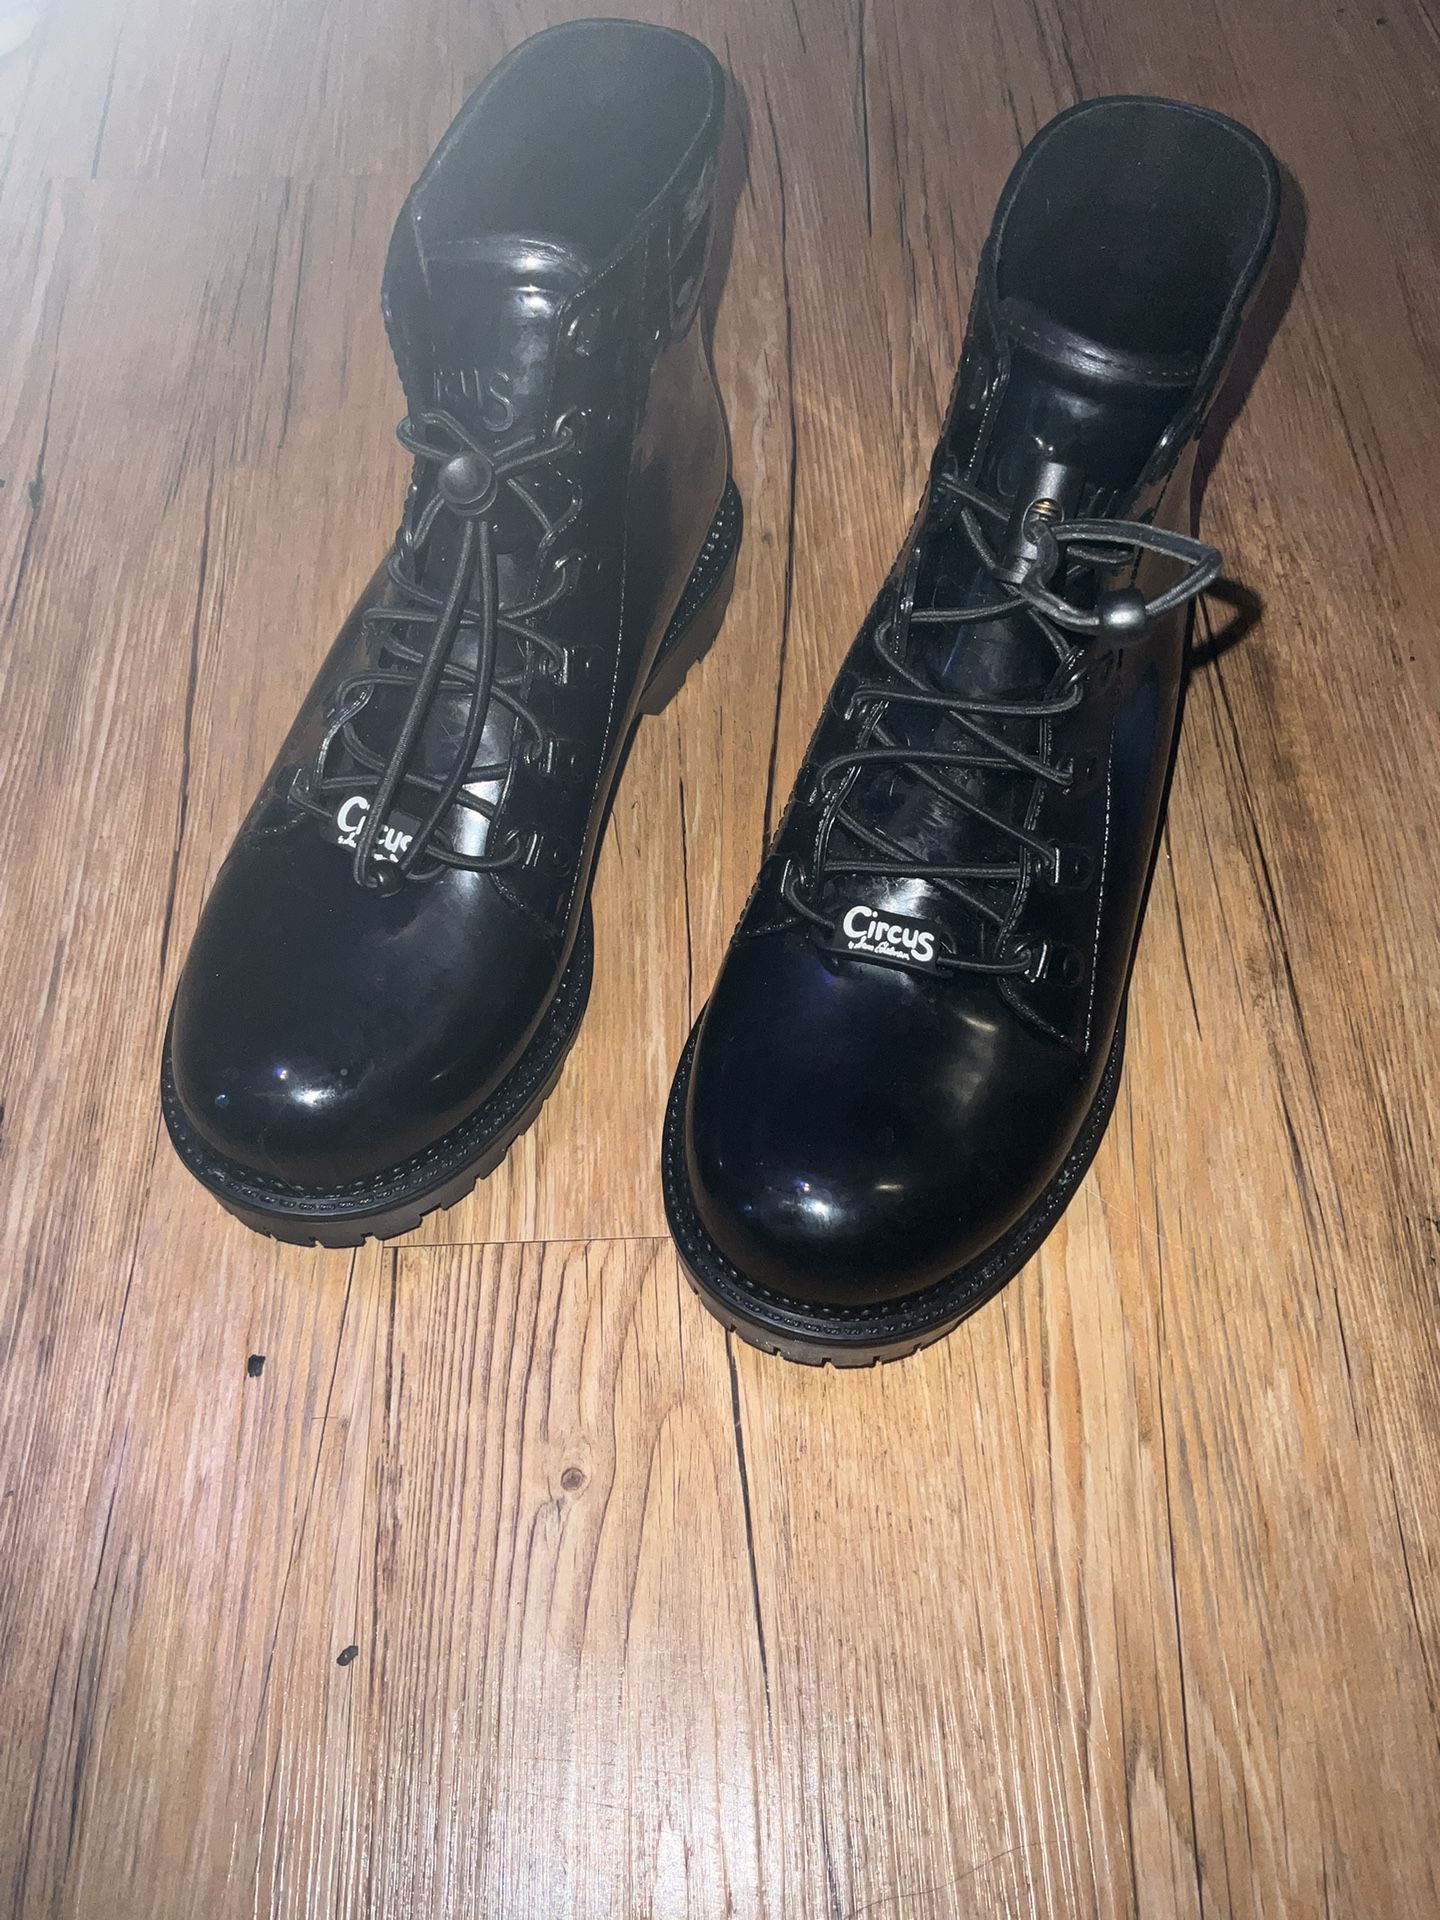 Circus By Sam Edelman Boots Size 8